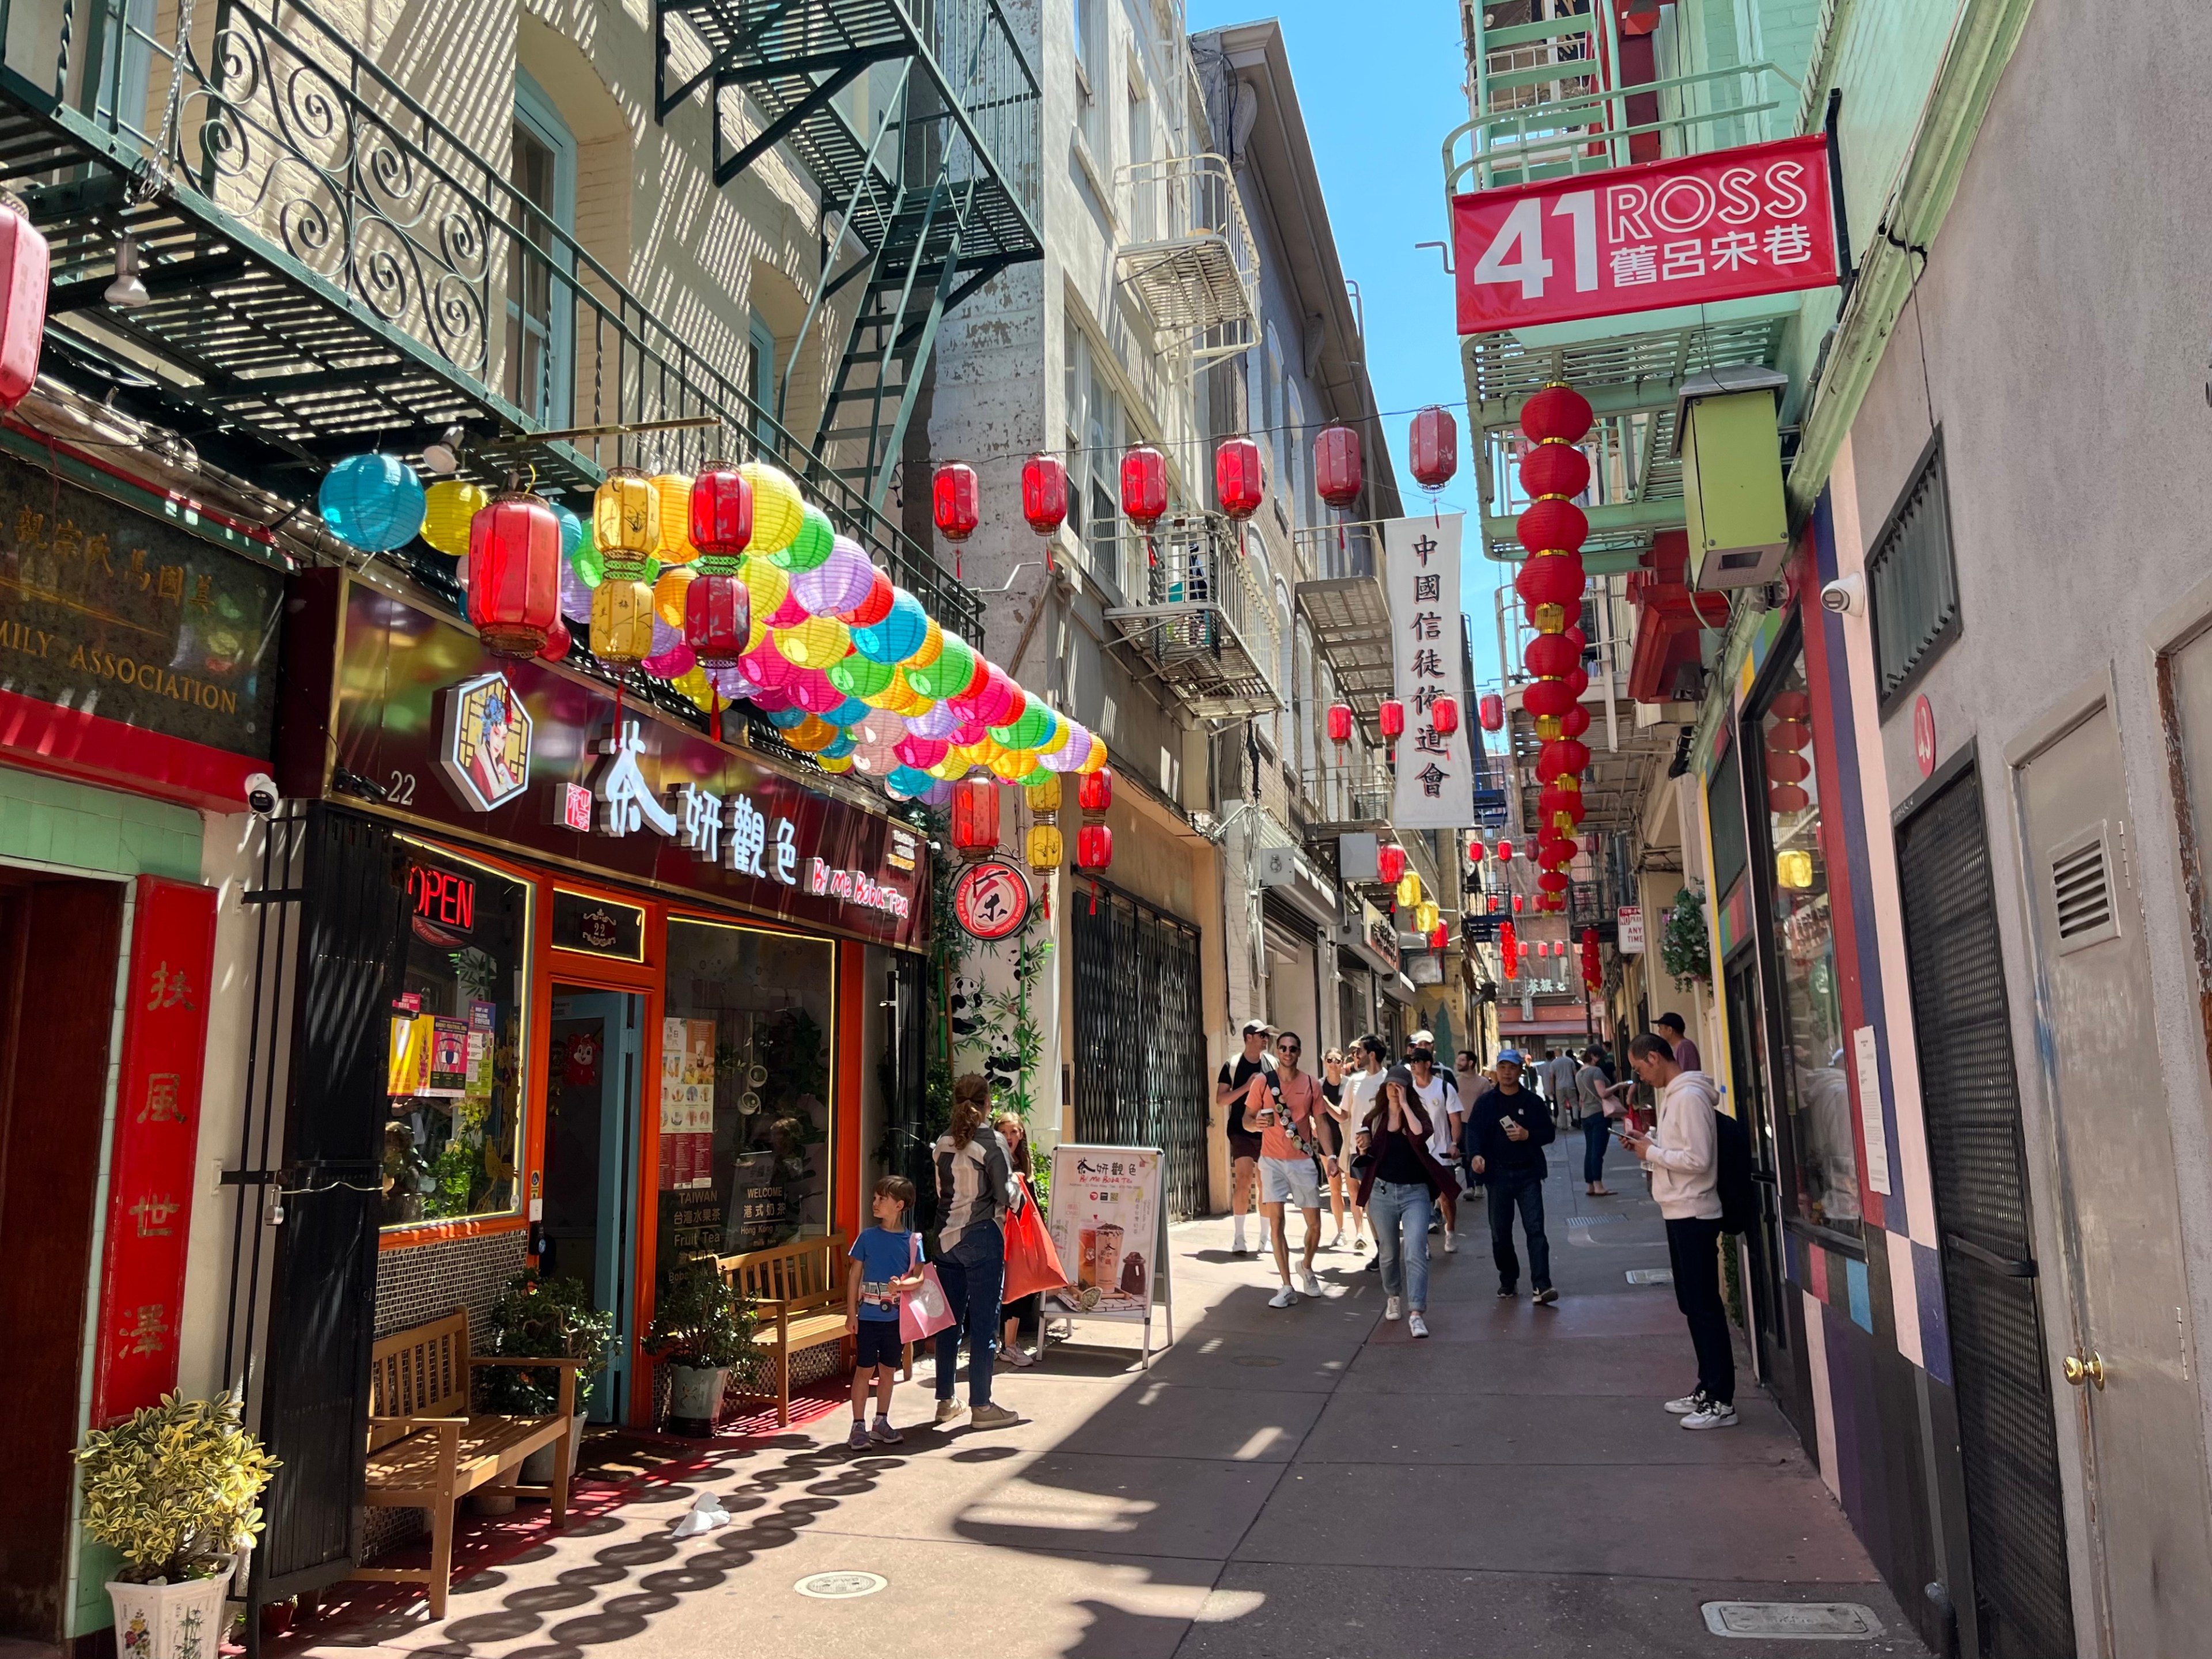 Colorful lanterns hang in a narrow San Francisco alleyway that has a red terrace and a red sign.